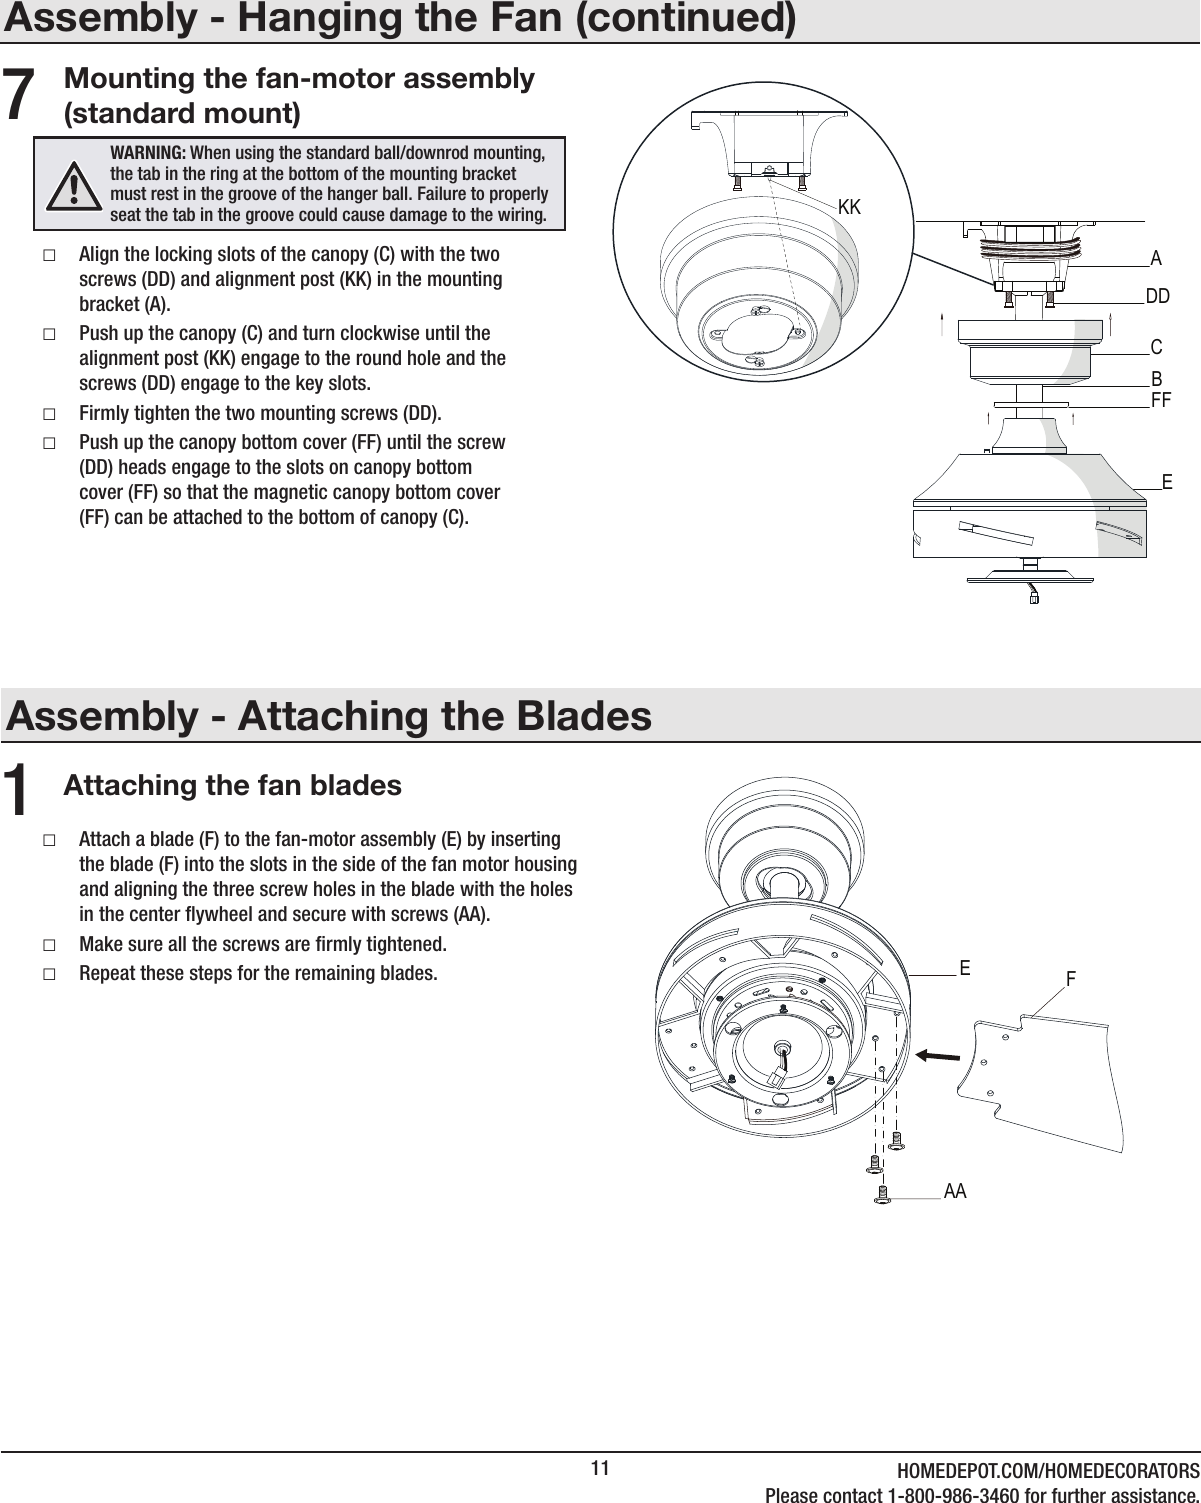 11 HOMEDEPOT.COM/HOMEDECORATORSPlease contact 1-800-986-3460 for further assistance.Assembly - Attaching the BladesAttaching the fan blades1 □Attach a blade (F) to the fan-motor assembly (E) by inserting the blade (F) into the slots in the side of the fan motor housing and aligning the three screw holes in the blade with the holes in the center ywheel and secure with screws (AA). □Make sure all the screws are rmly tightened. □Repeat these steps for the remaining blades.Assembly - Hanging the Fan (continued)Mounting the fan-motor assembly (standard mount) □Align the locking slots of the canopy (C) with the two screws (DD) and alignment post (KK) in the mounting bracket (A). □Push up the canopy (C) and turn clockwise until the alignment post (KK) engage to the round hole and the screws (DD) engage to the key slots. □Firmly tighten the two mounting screws (DD). □Push up the canopy bottom cover (FF) until the screw (DD) heads engage to the slots on canopy bottom cover (FF) so that the magnetic canopy bottom cover (FF) can be attached to the bottom of canopy (C).7WARNING: When using the standard ball/downrod mounting, the tab in the ring at the bottom of the mounting bracket must rest in the groove of the hanger ball. Failure to properly seat the tab in the groove could cause damage to the wiring.CADDFFBEKKAAEF